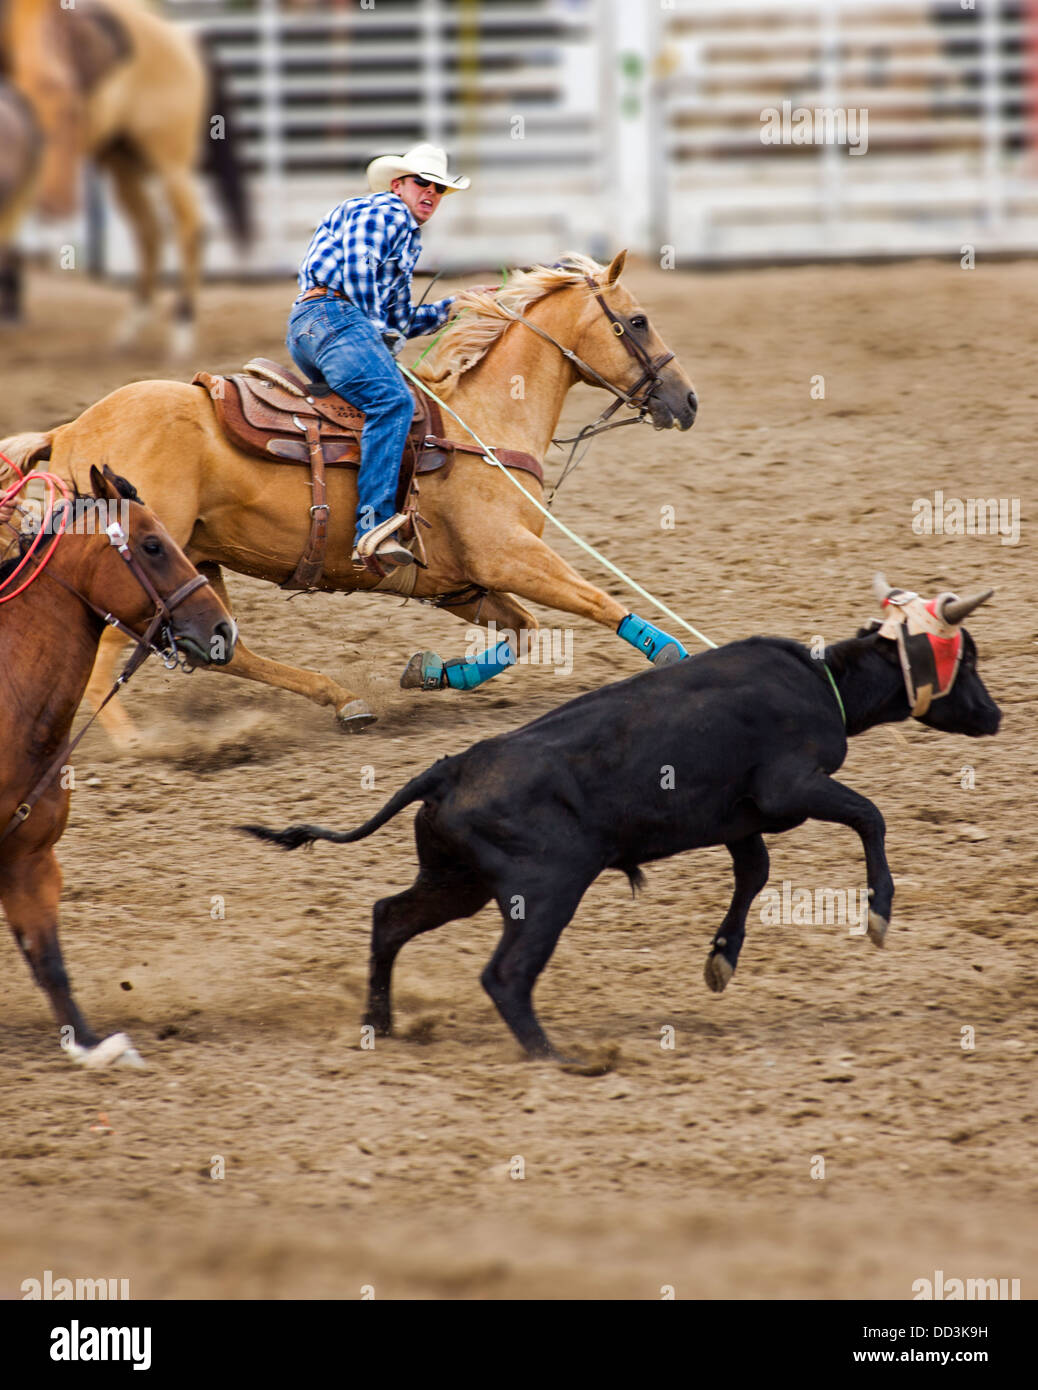 Cowboy on horseback competes in the tie-down roping event, Chaffee County Fair & Rodeo Stock Photo